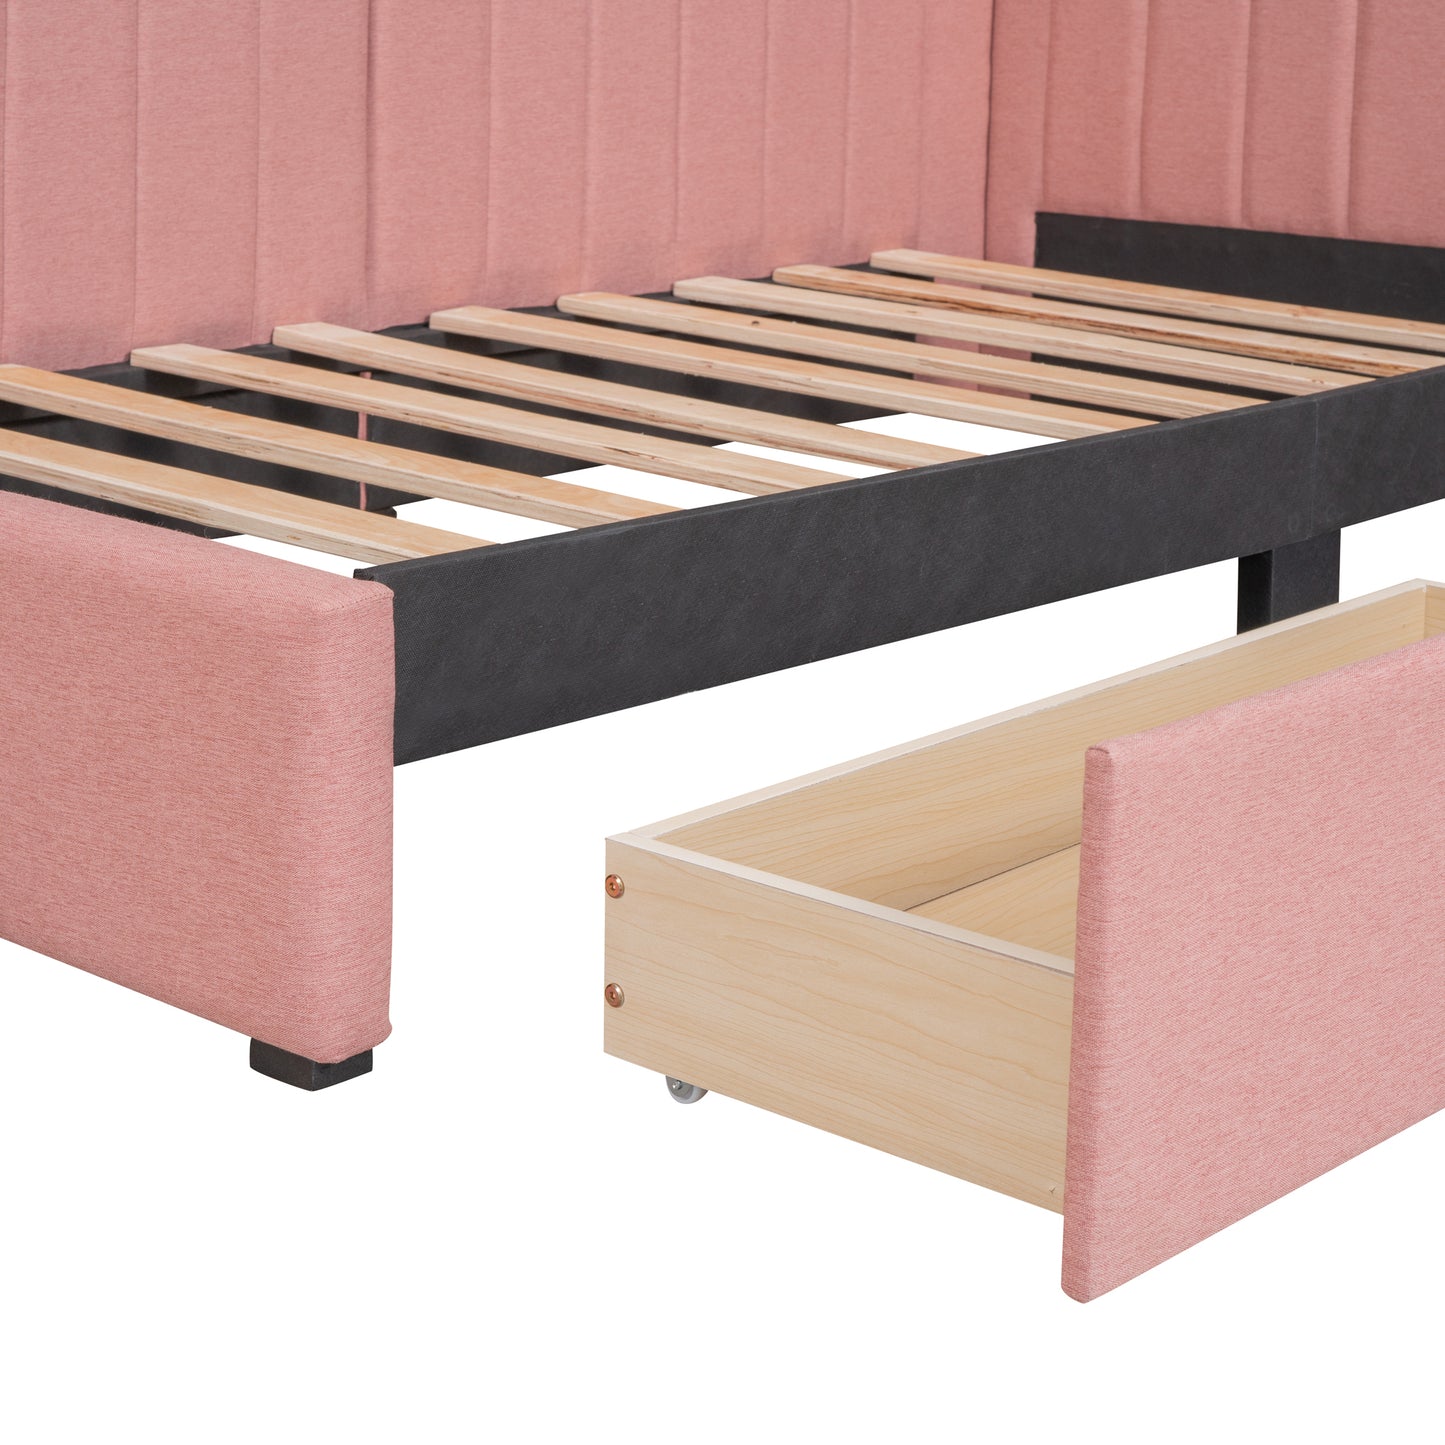 Upholstered Daybed with 2 Storage Drawers Twin Size Sofa Bed Frame No Box Spring Needed, Linen Fabric (Pink)